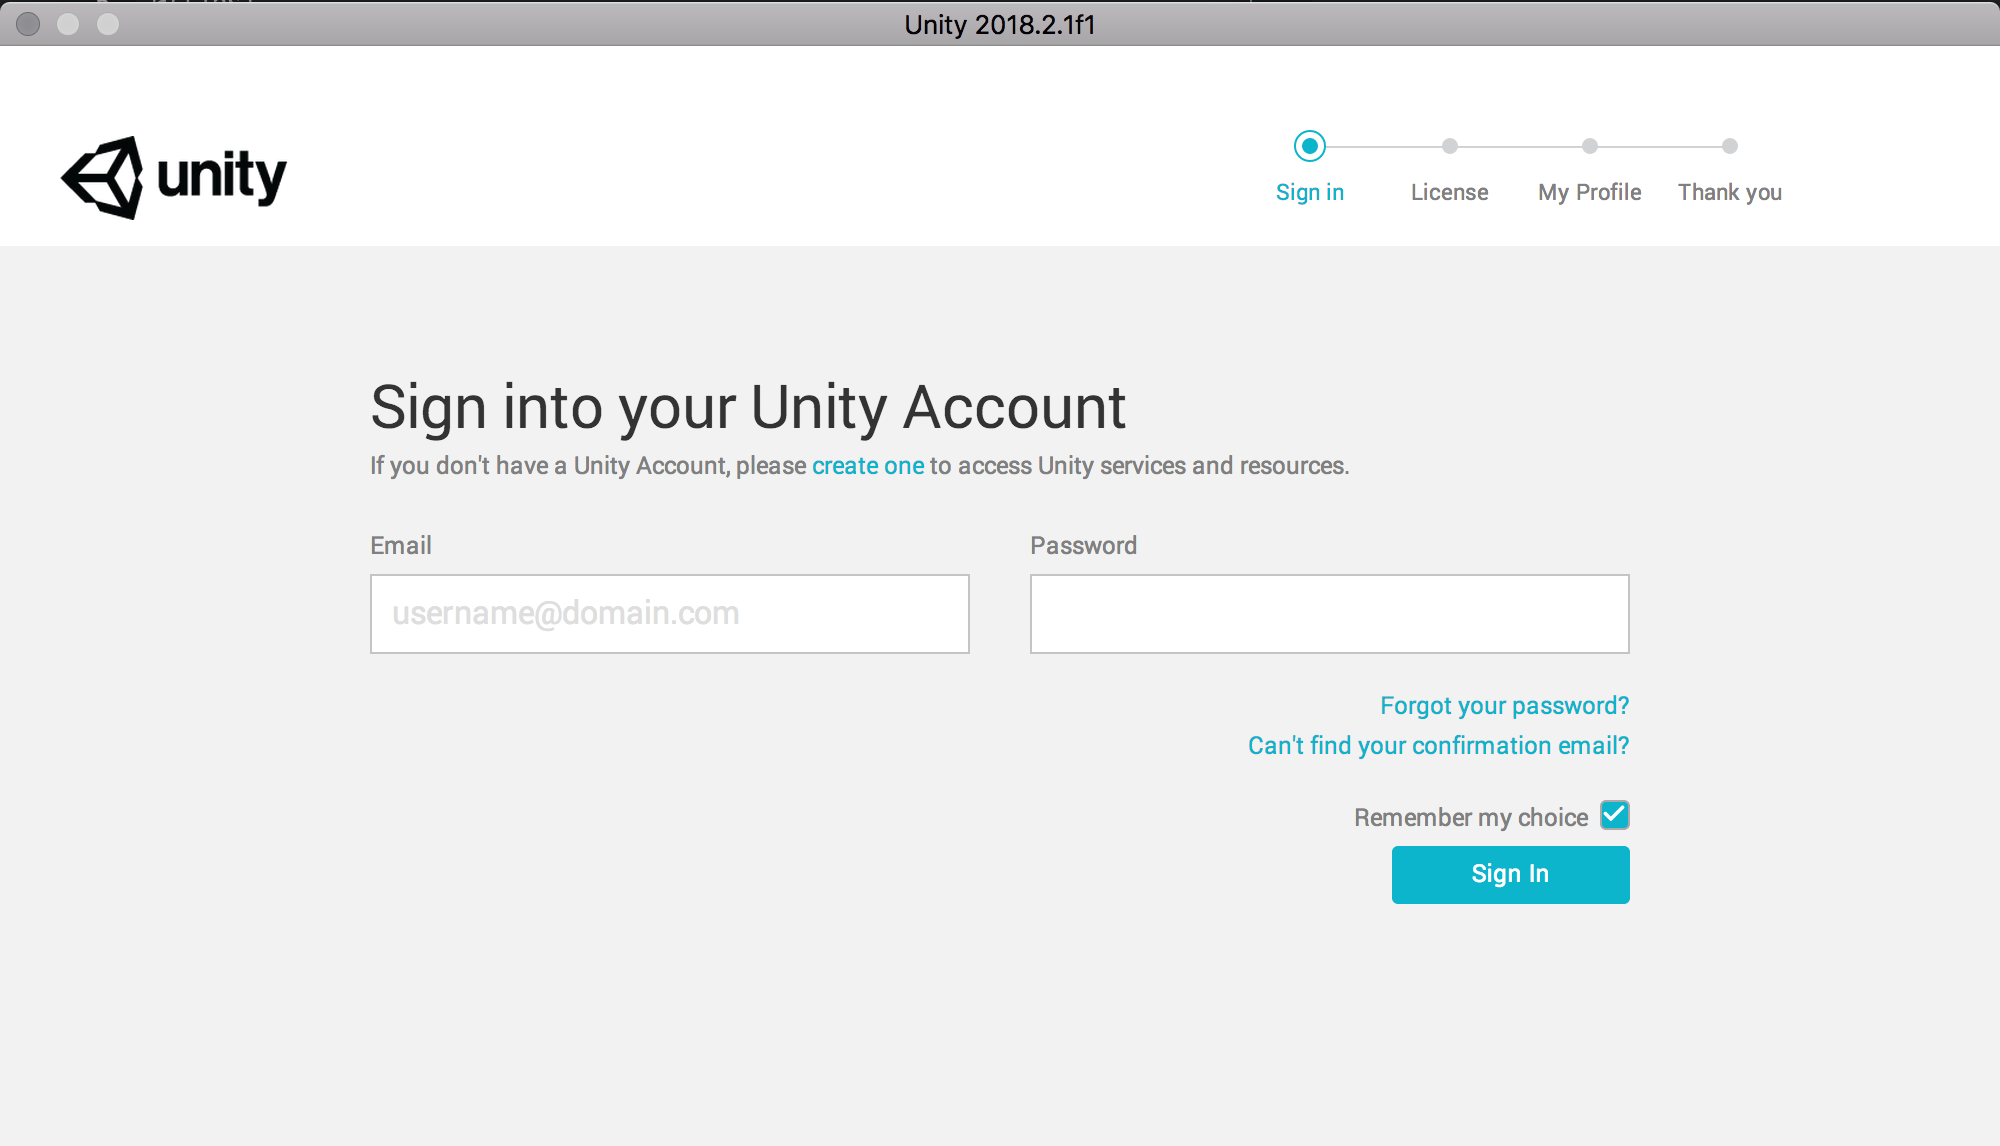 Sign into your Unity Account